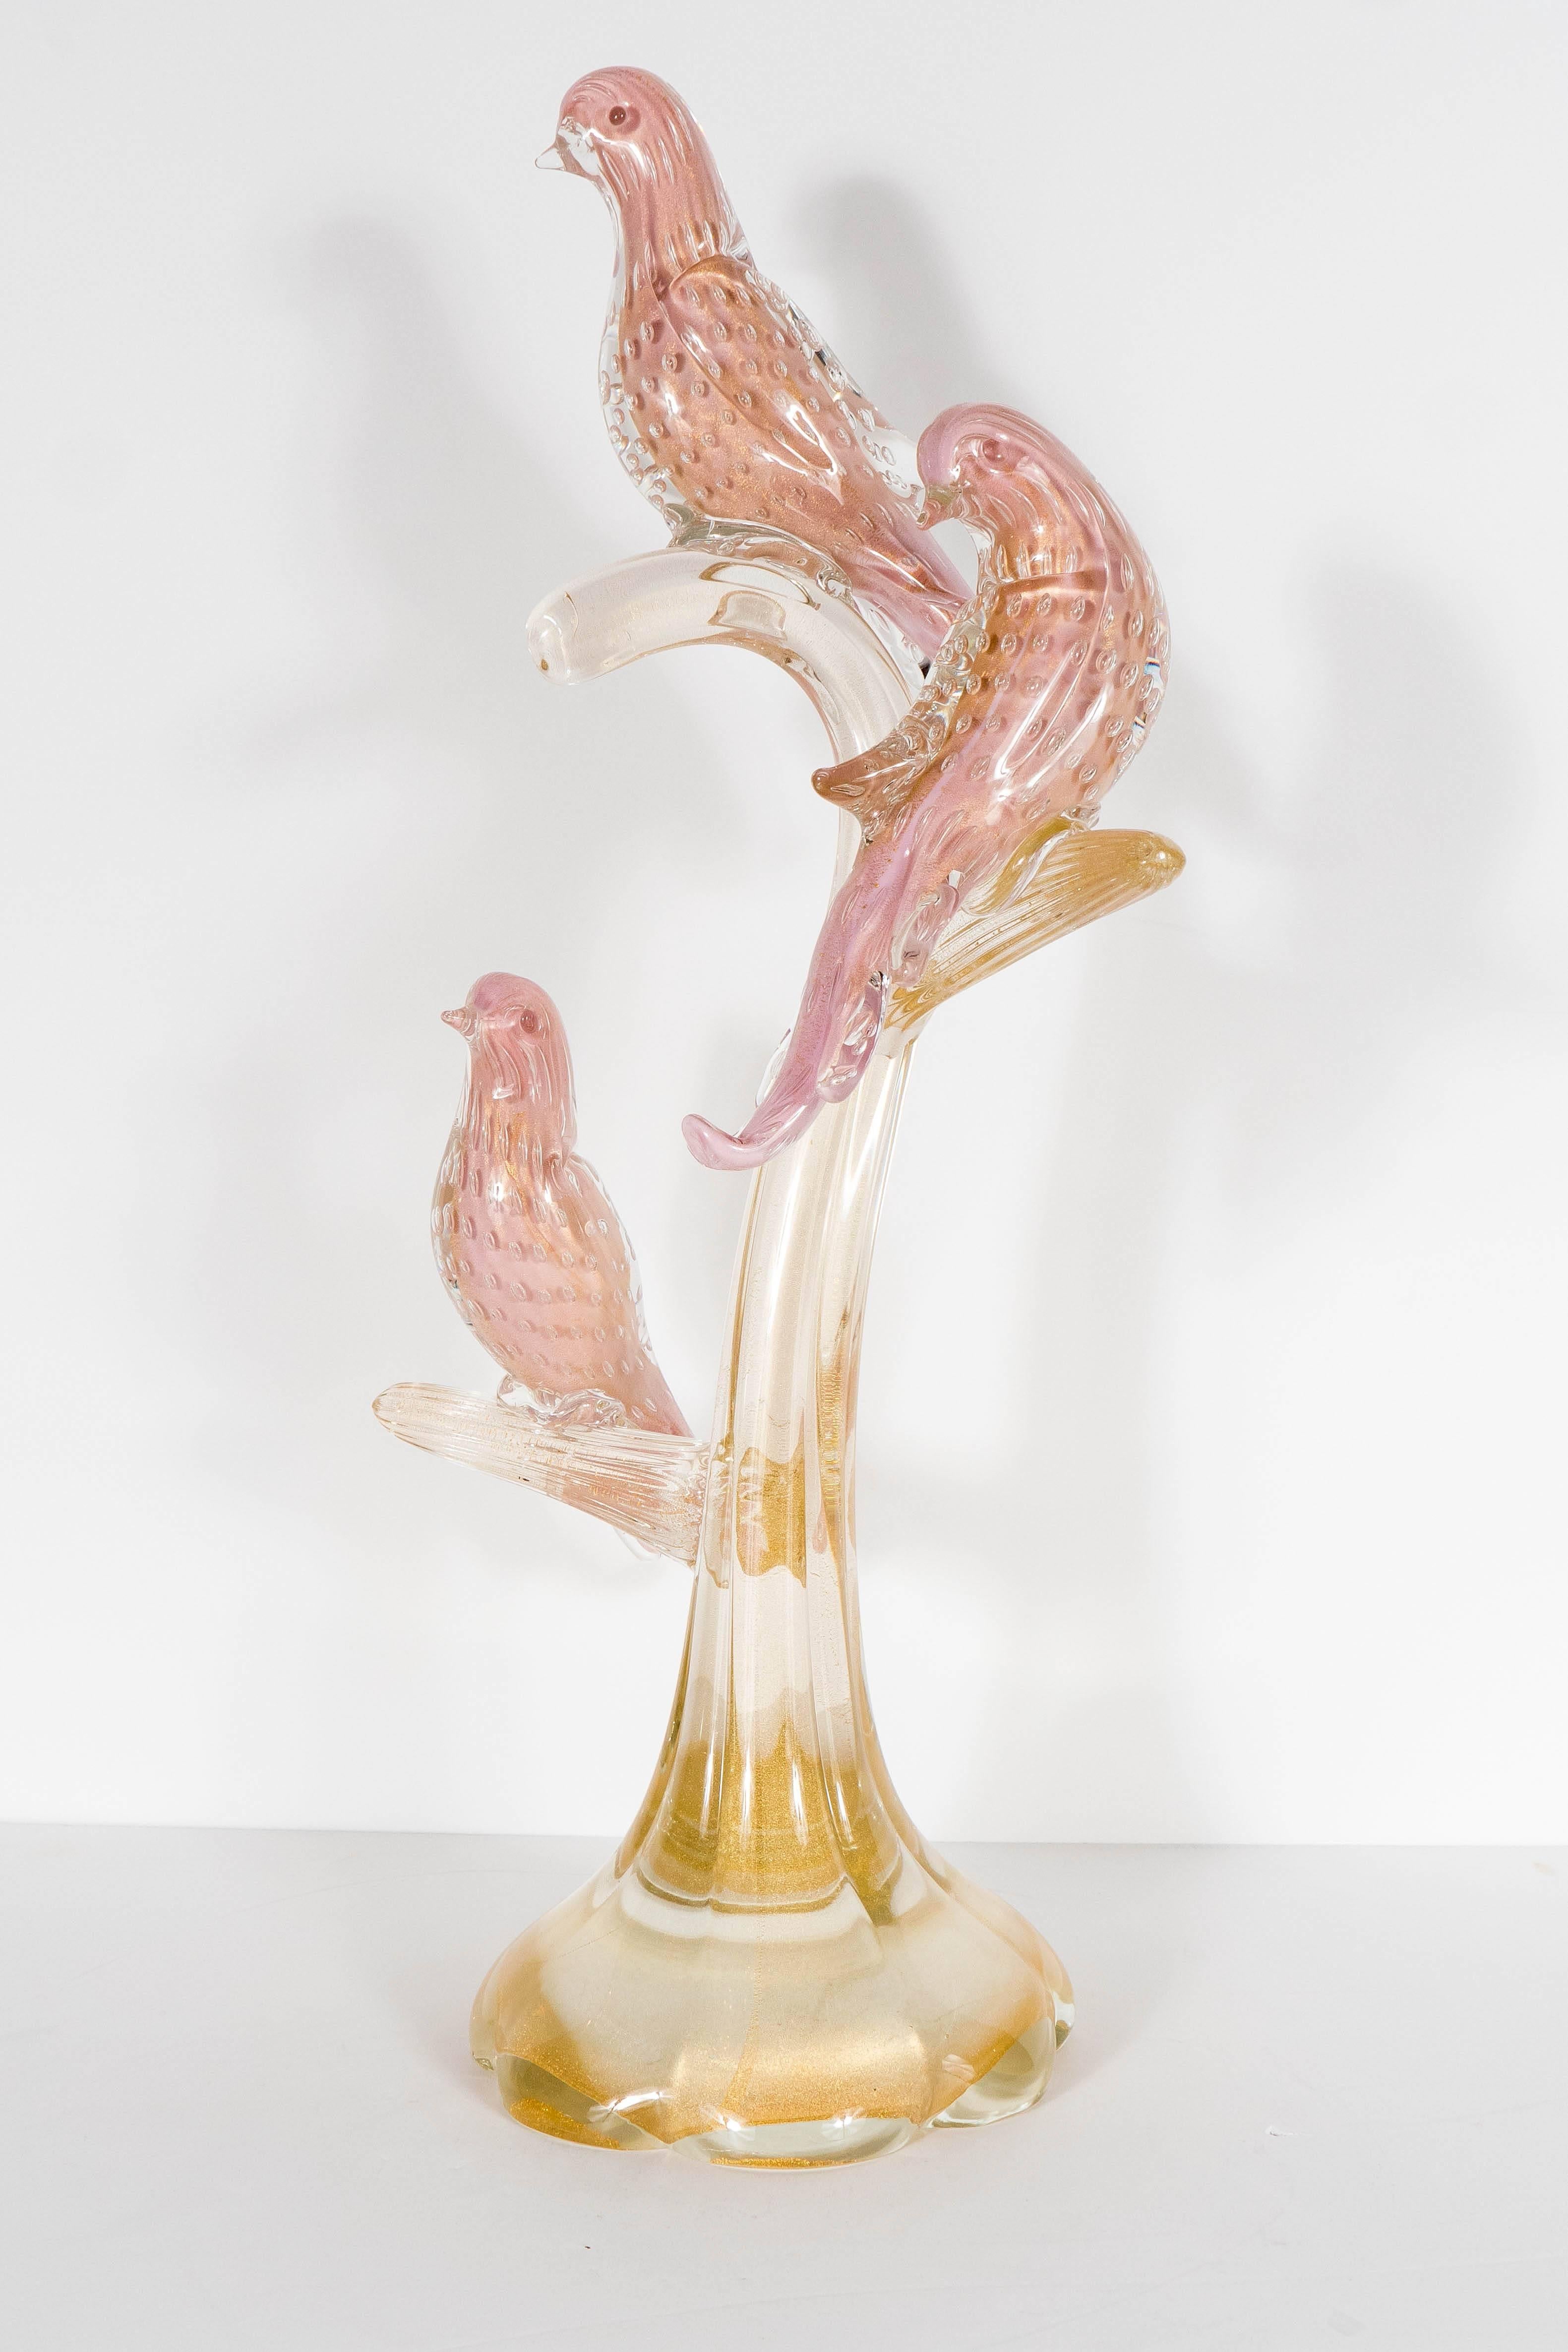 Hand-Crafted Midcentury Murano Glass Sculpture of Three Birds on a Branch